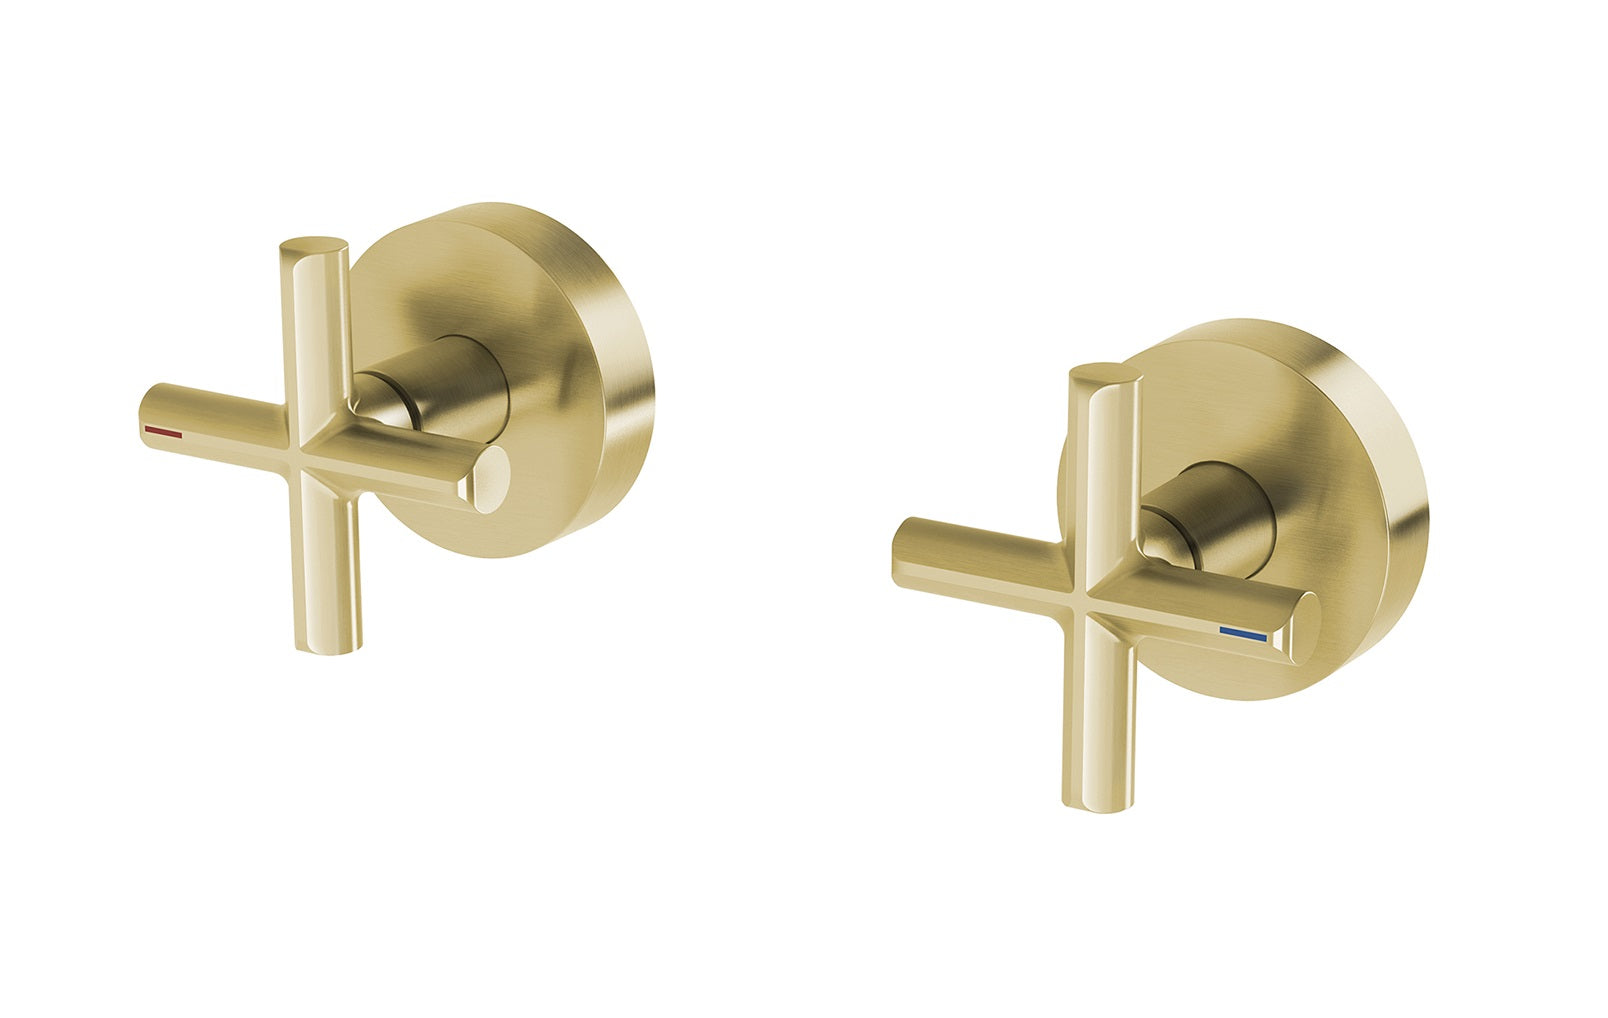 PHOENIX VIVID SLIMLINE PLUS WALL TOP ASSEMBLIES 15MM EXTENDED SPINDLES BRUSHED GOLD